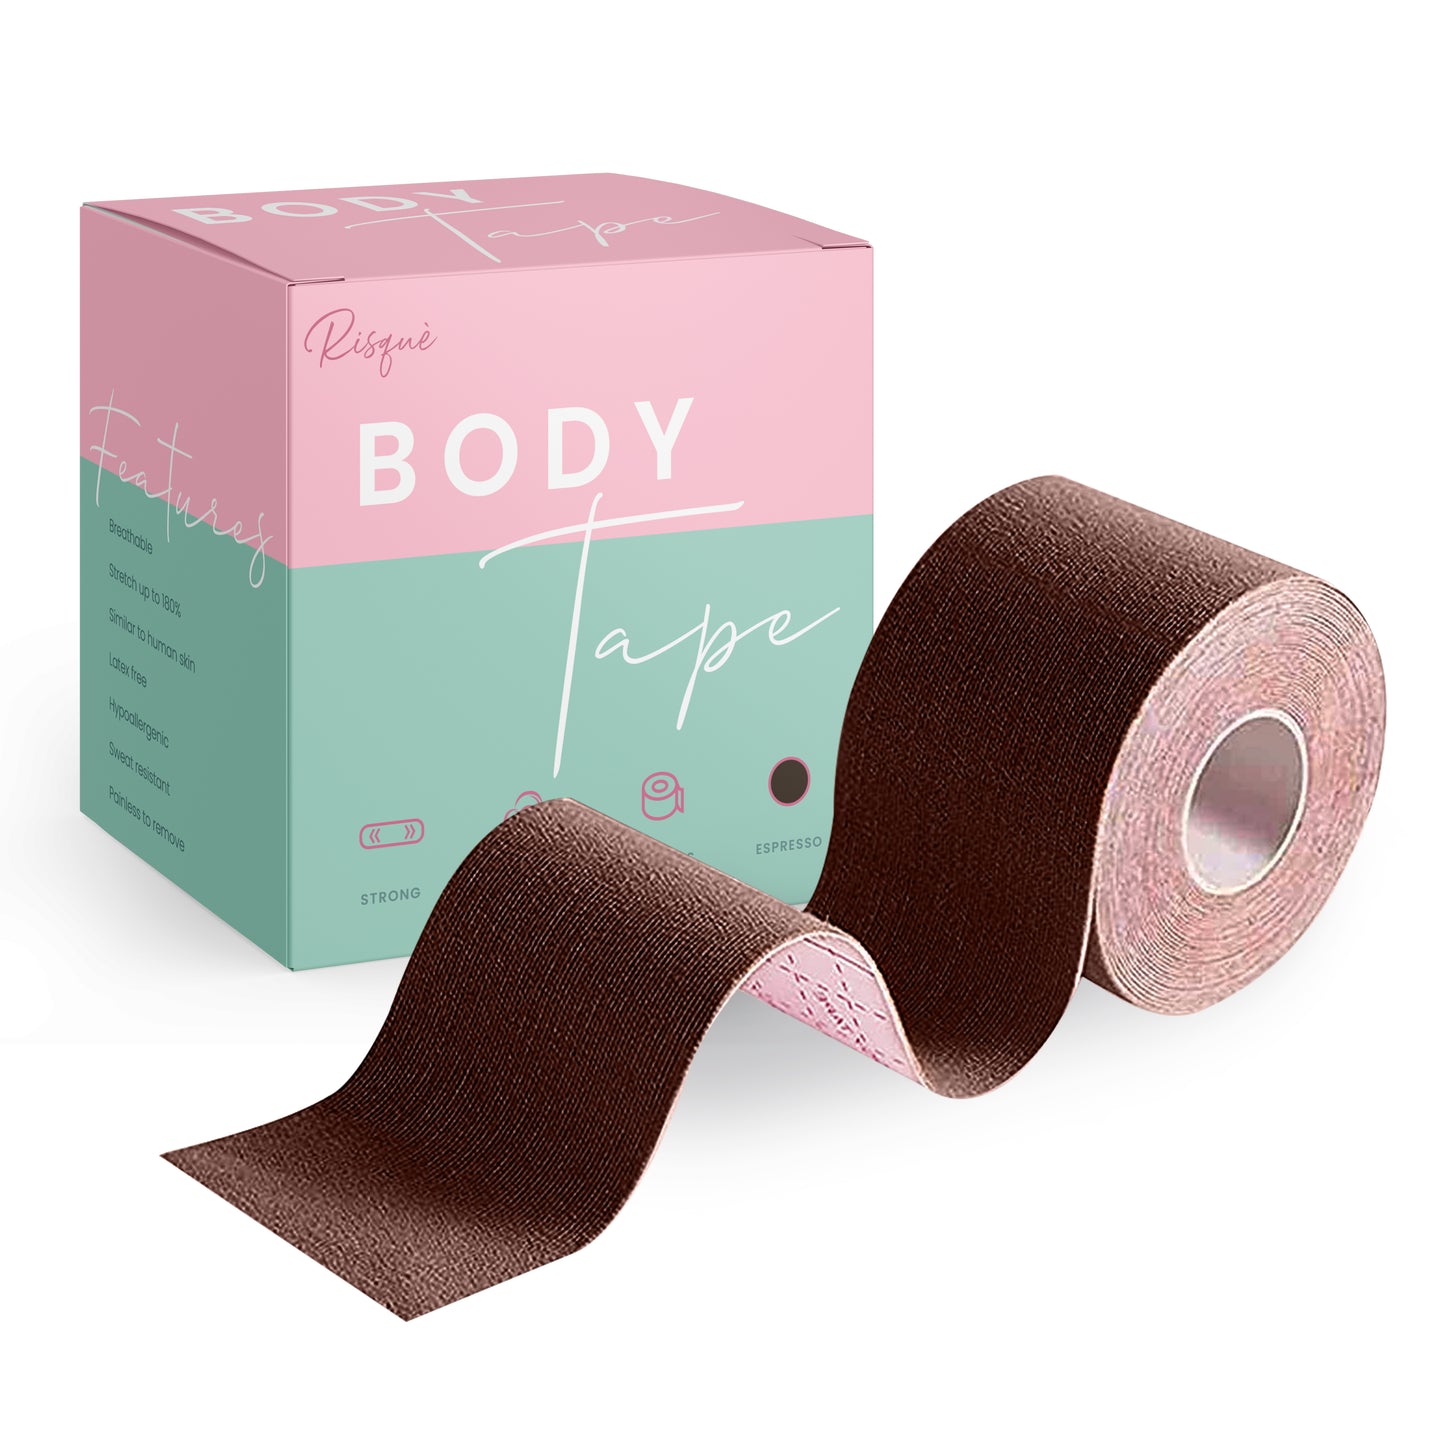 Boob Tape, Breast Lift Tape, Body Tape For Breast Support Lift Wate